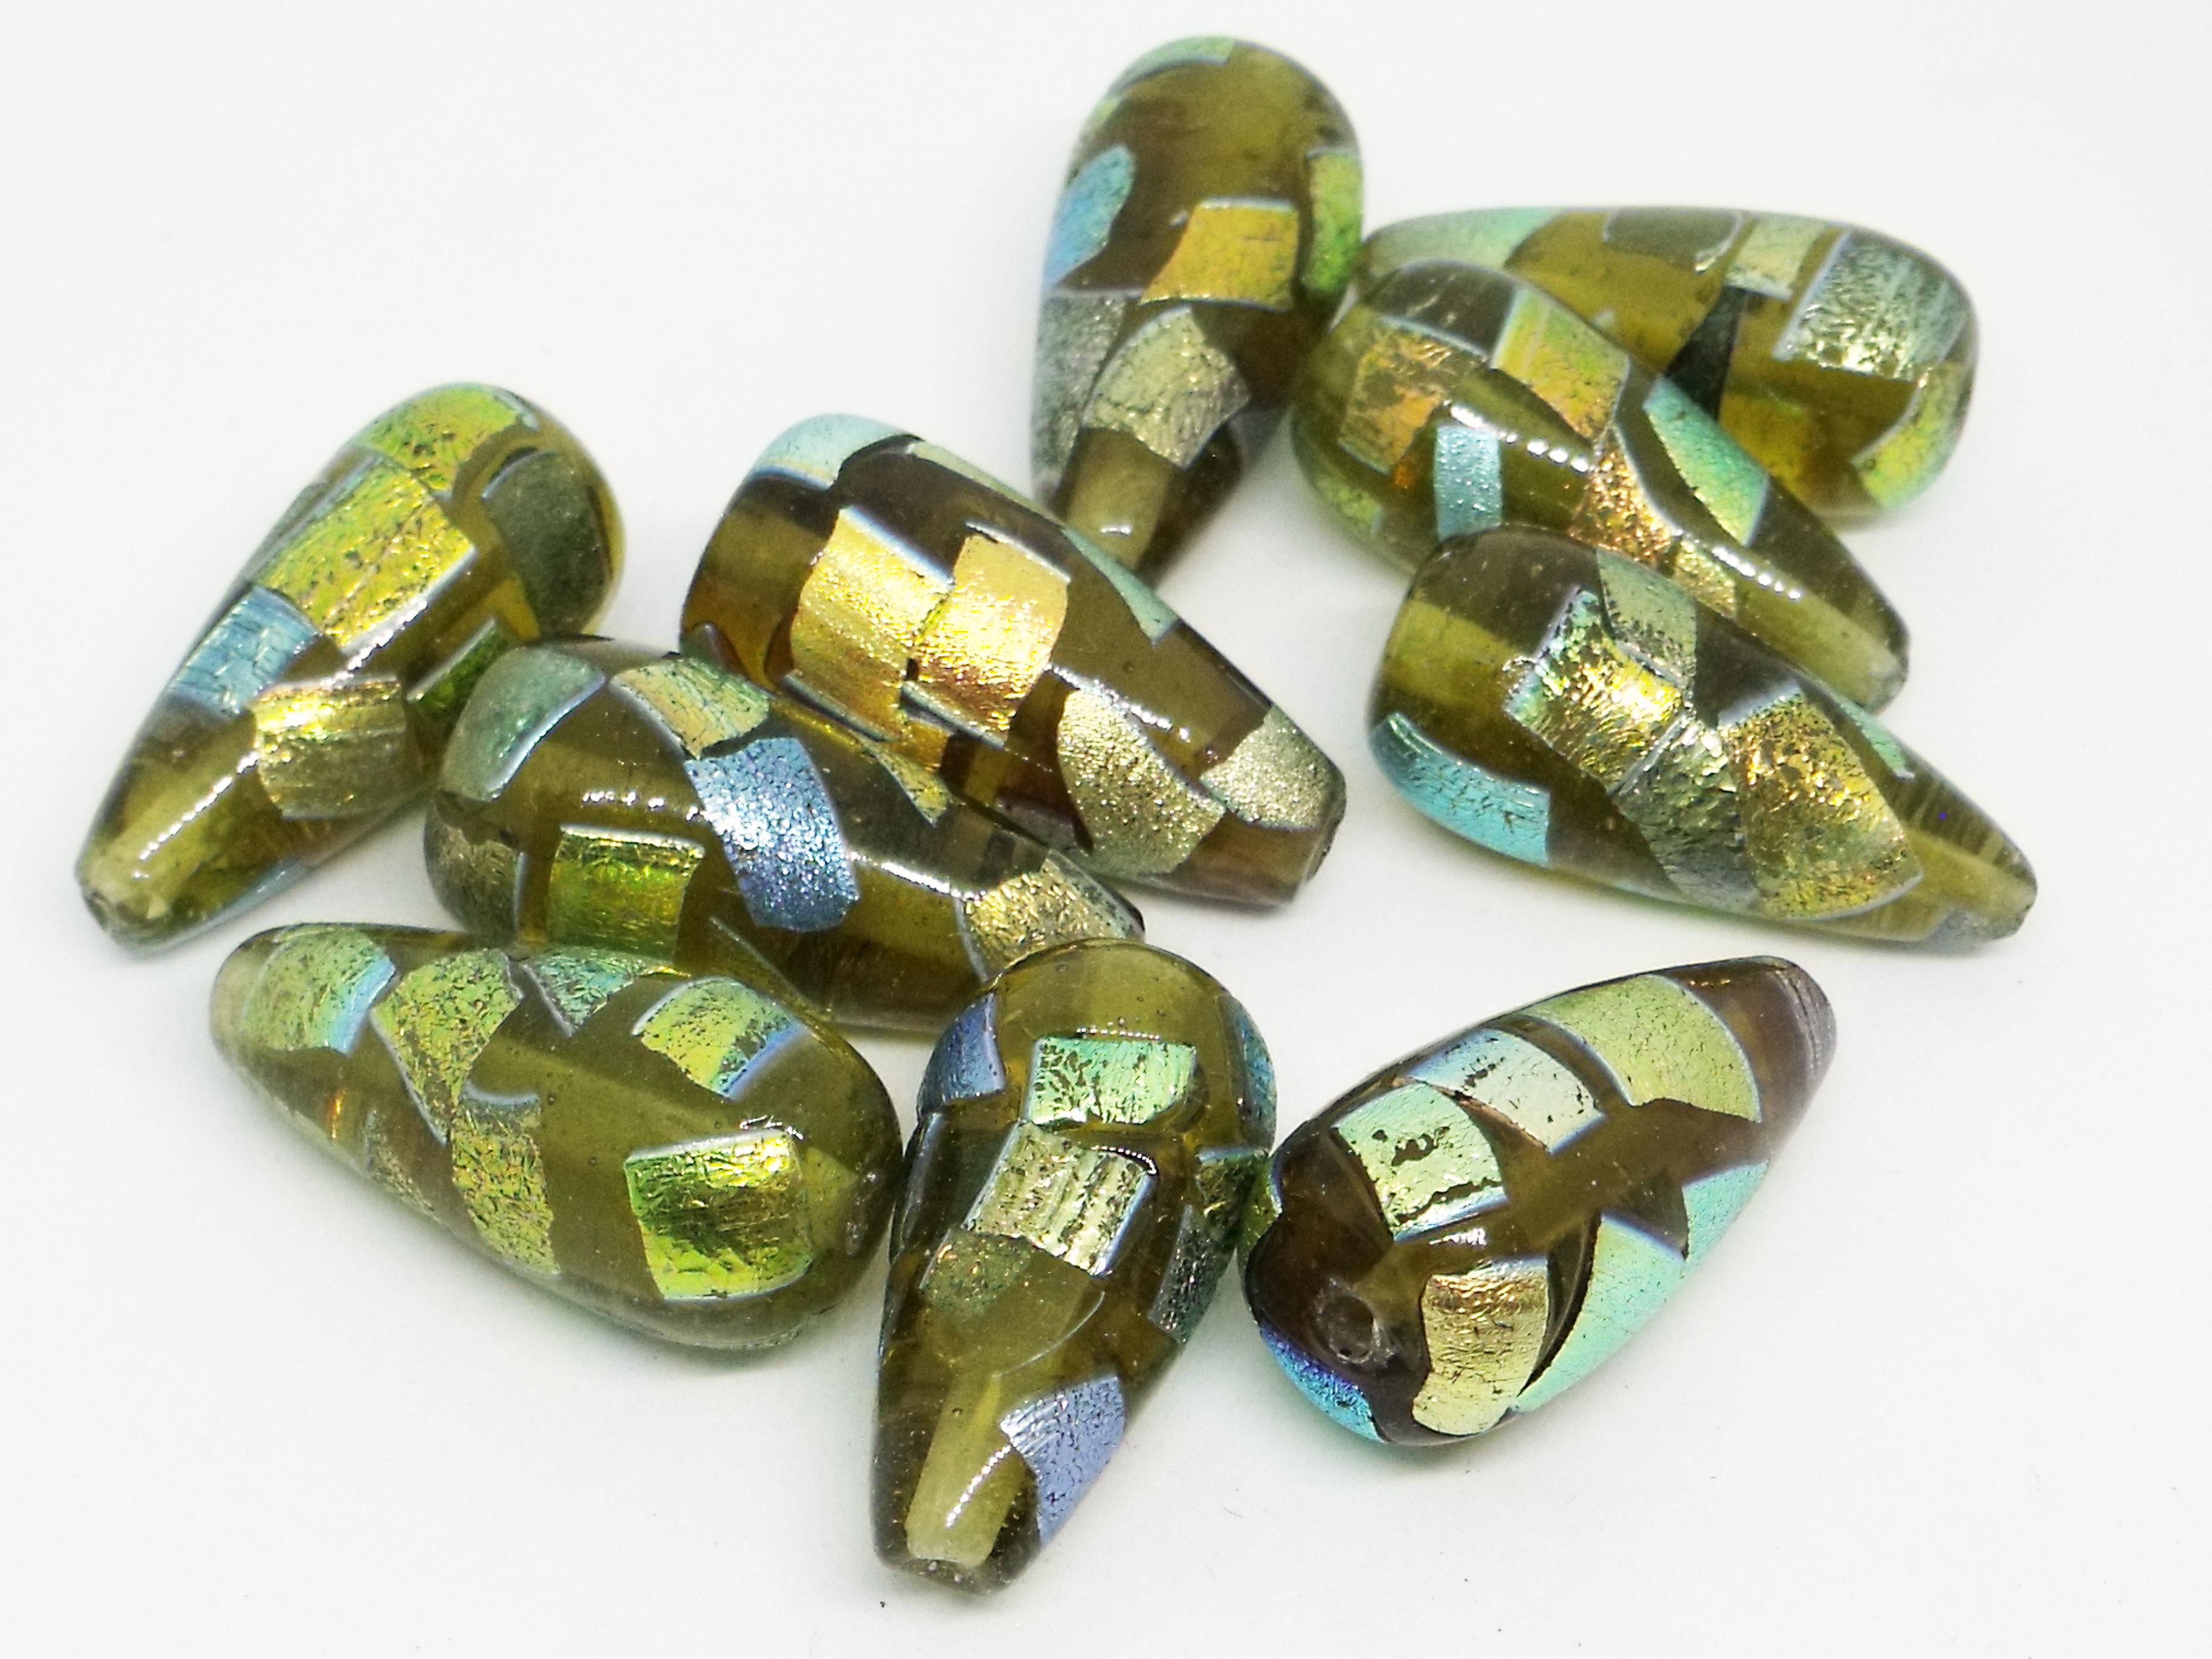 29x12mm Tapered Glass Teardrop Bead - Clear Amber with Dichroic Foil Pattern